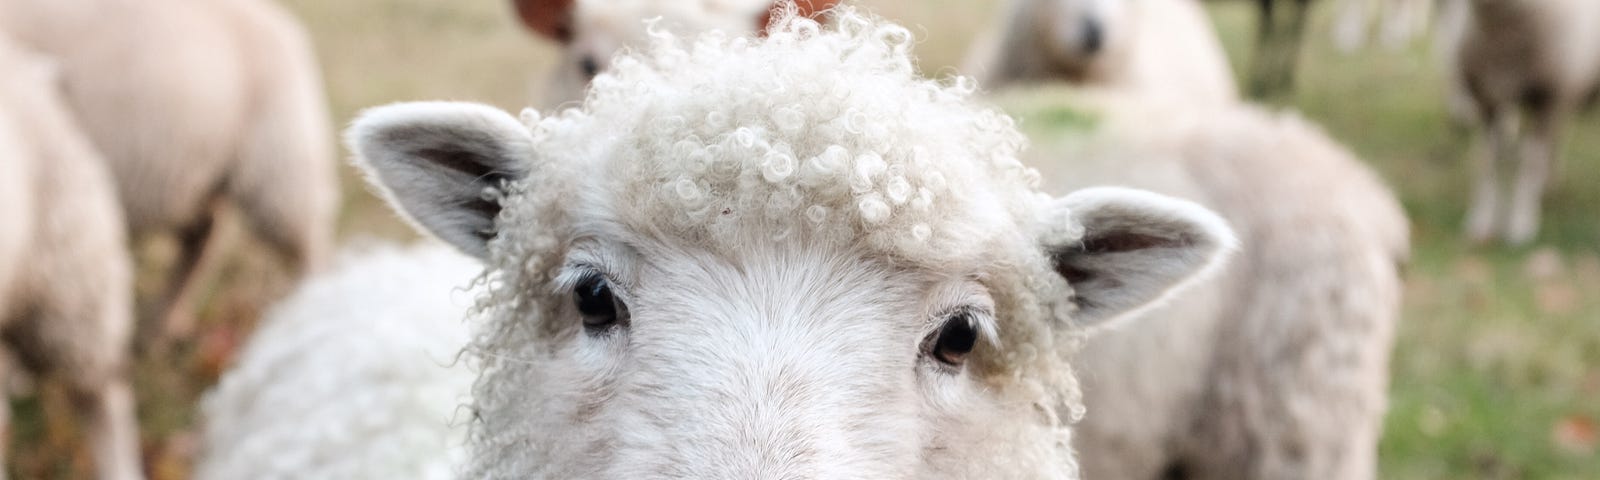 Start Sleeping Better with These 3 Ideas from Sleep Research Counting sheep isn’t one of them